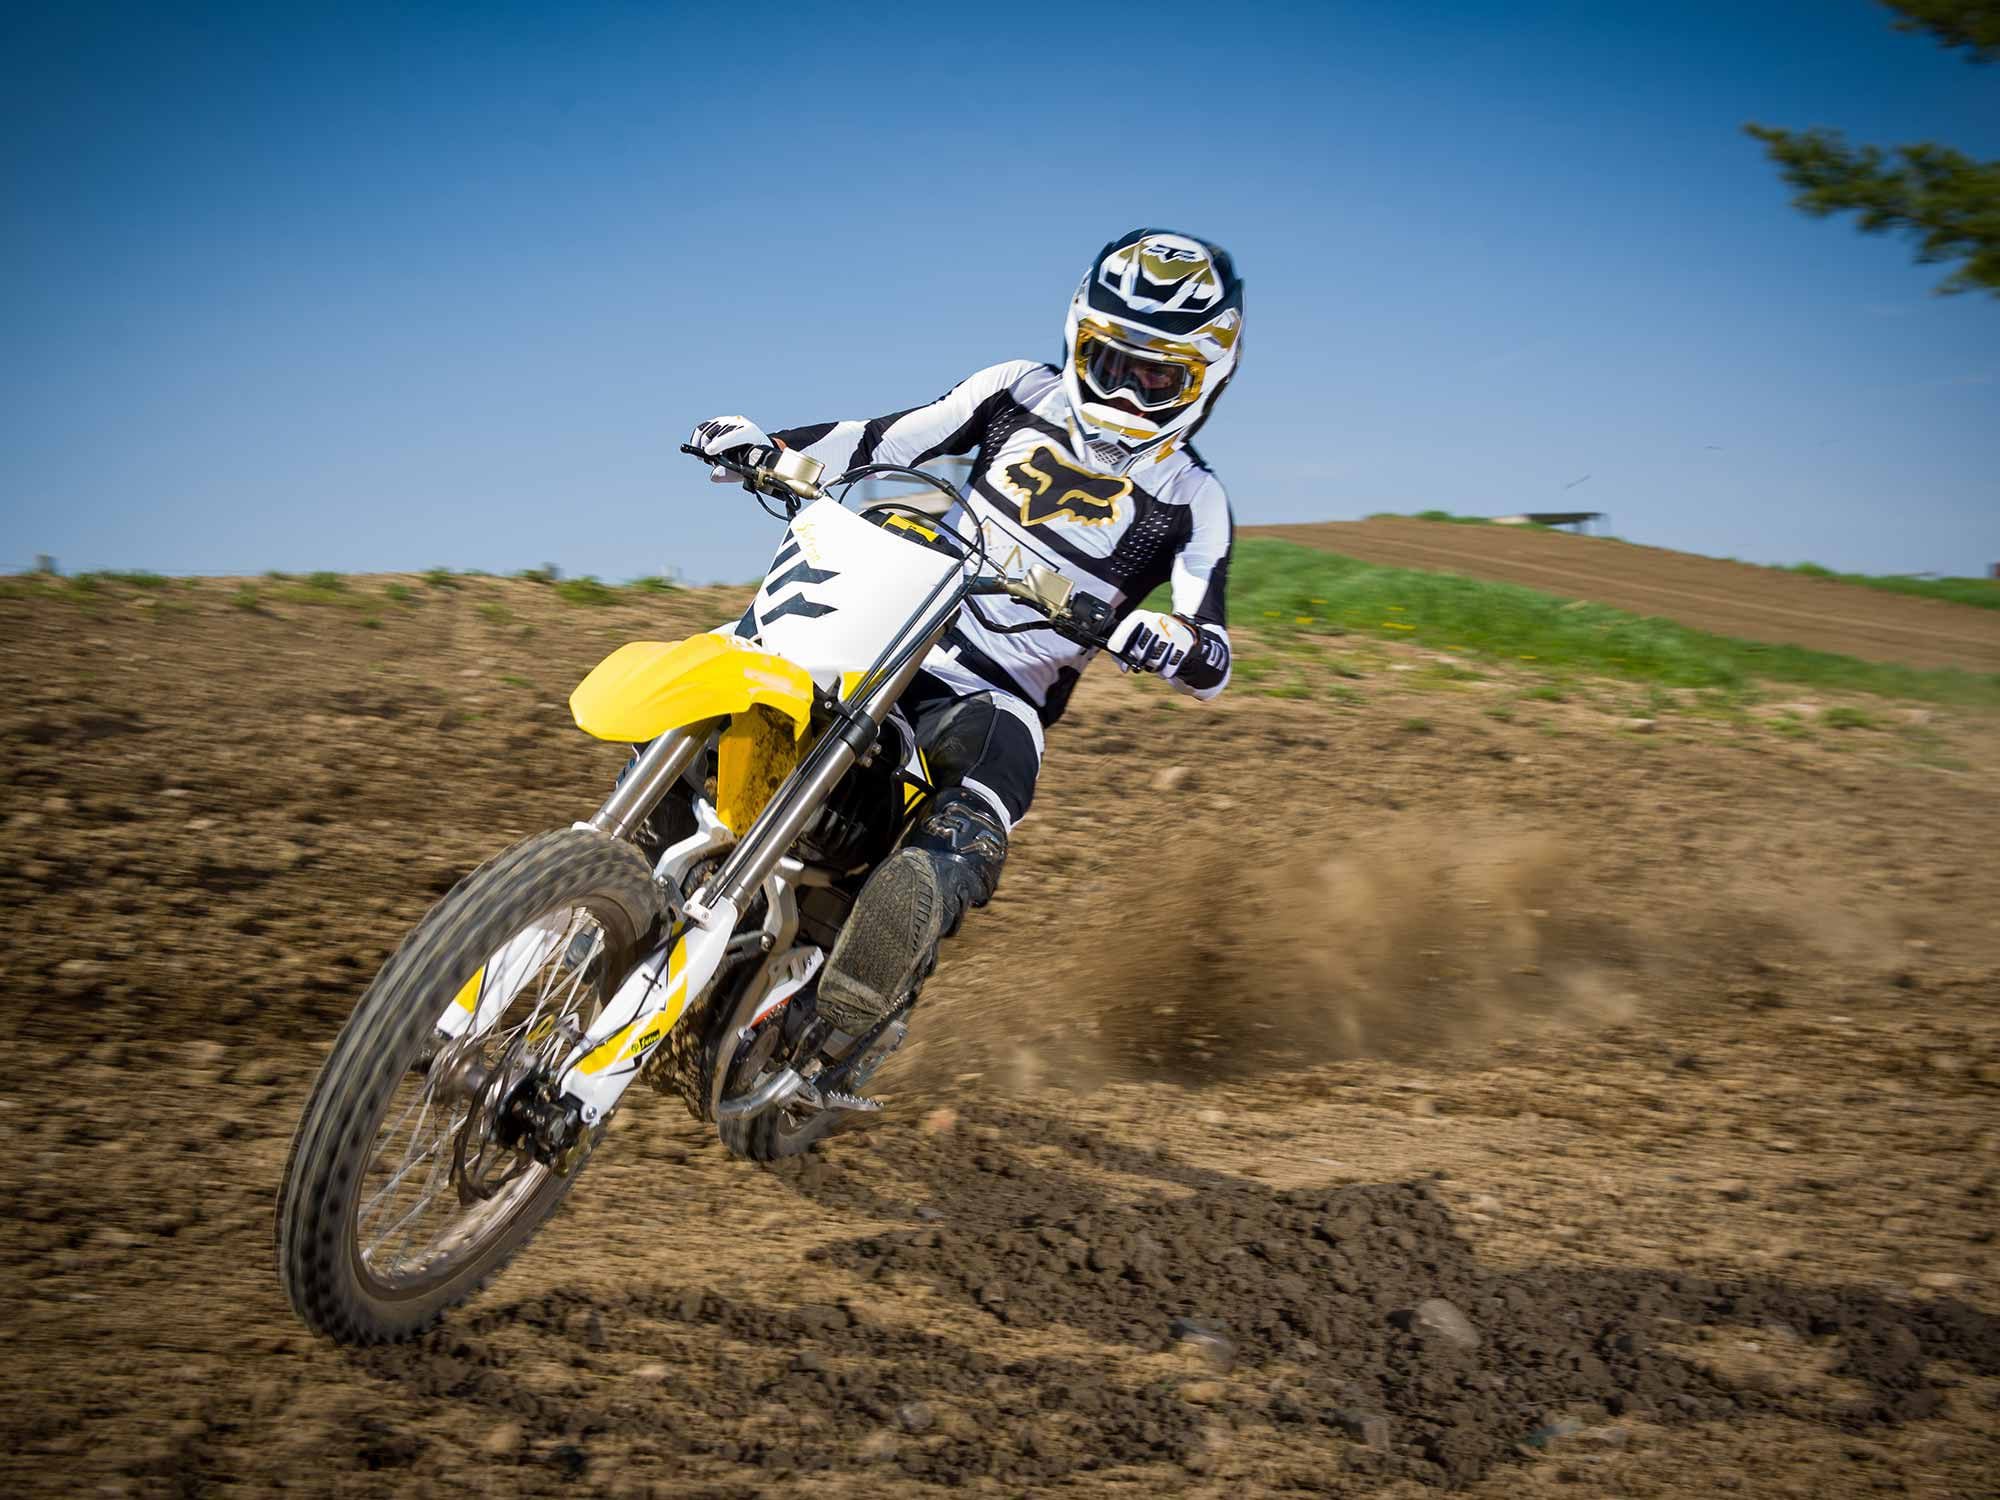 A 21-inch front wheel and 18-inch rear should allow for tackling berms and dirt whoops nicely.